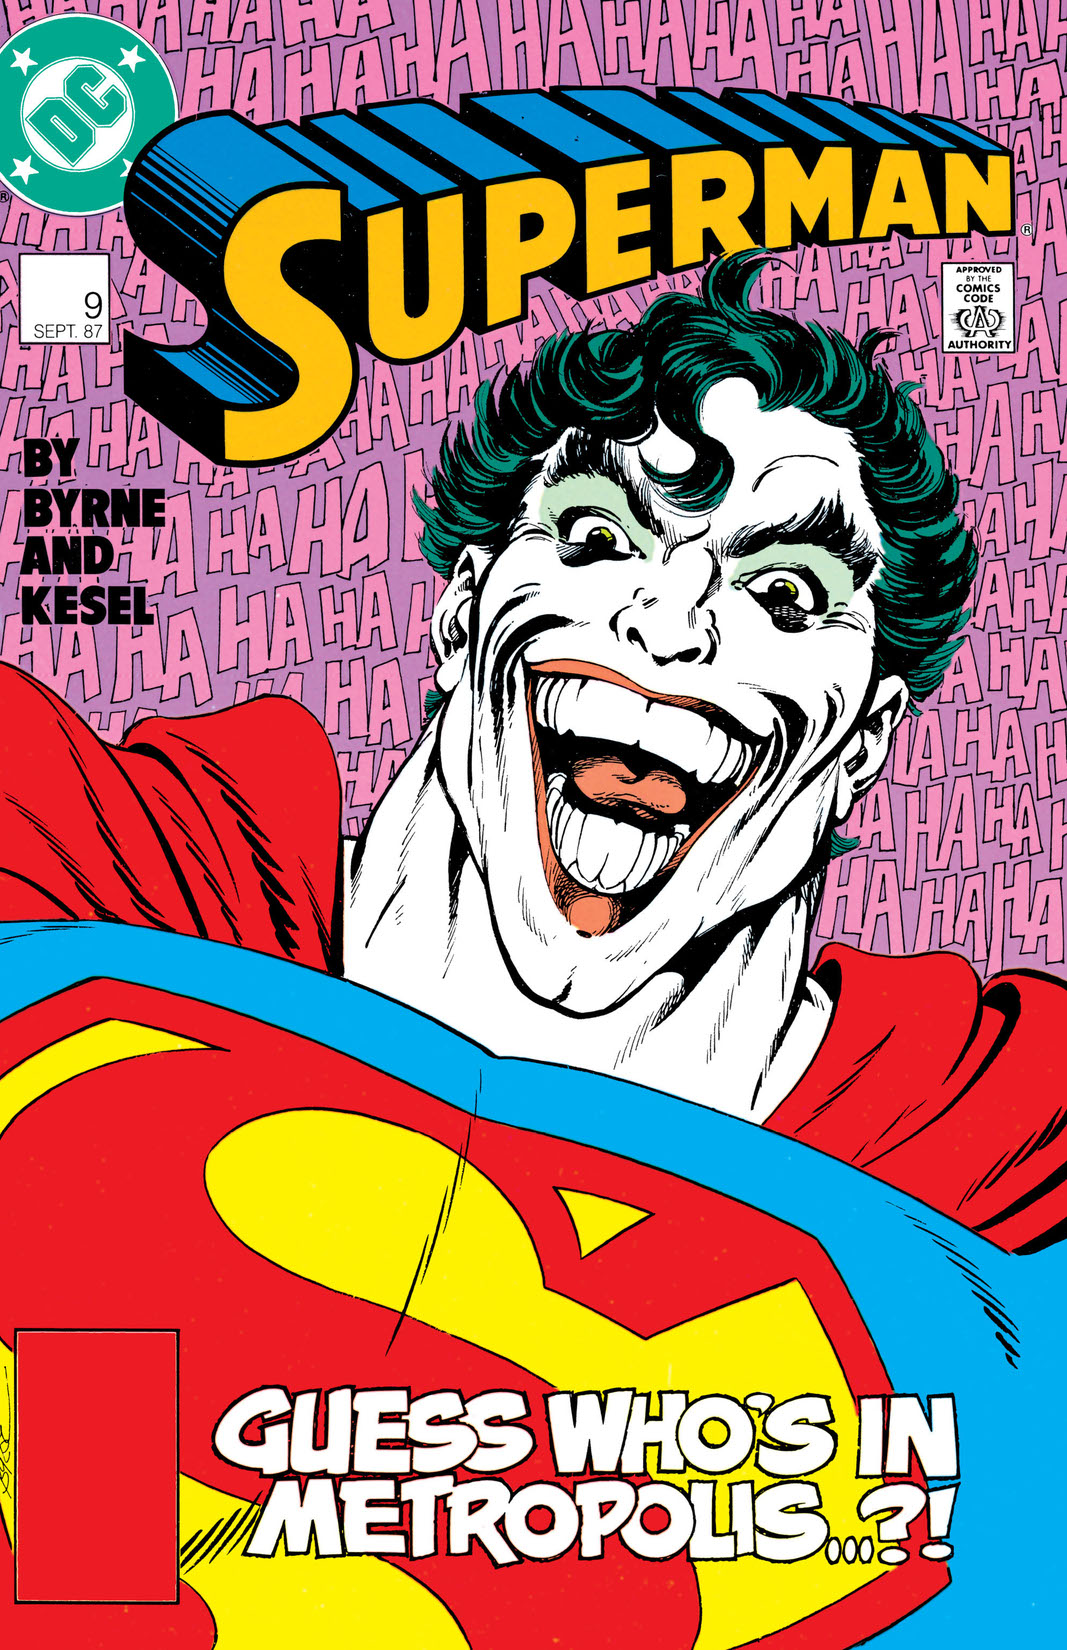 Superman (1986-) #9 preview images